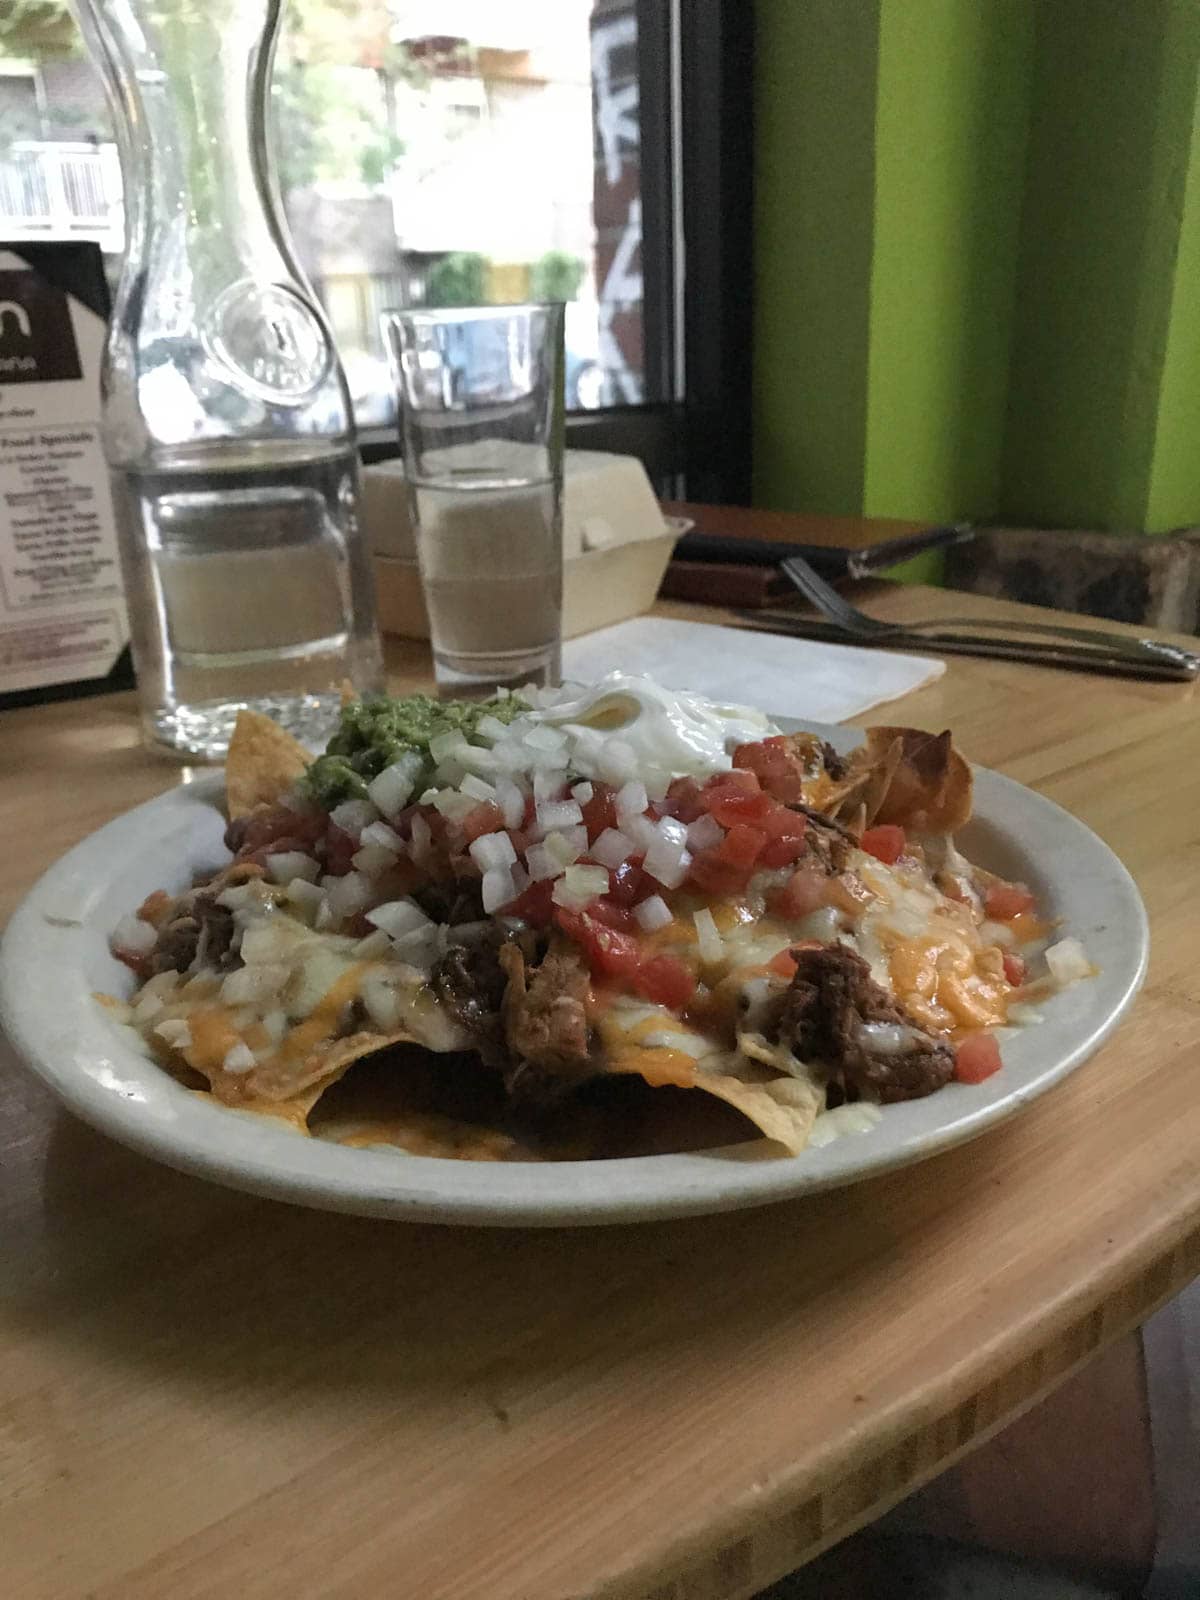 A plate of nachos with toppings of pico de gallo, avocado and onion, sitting on a wooden high table.